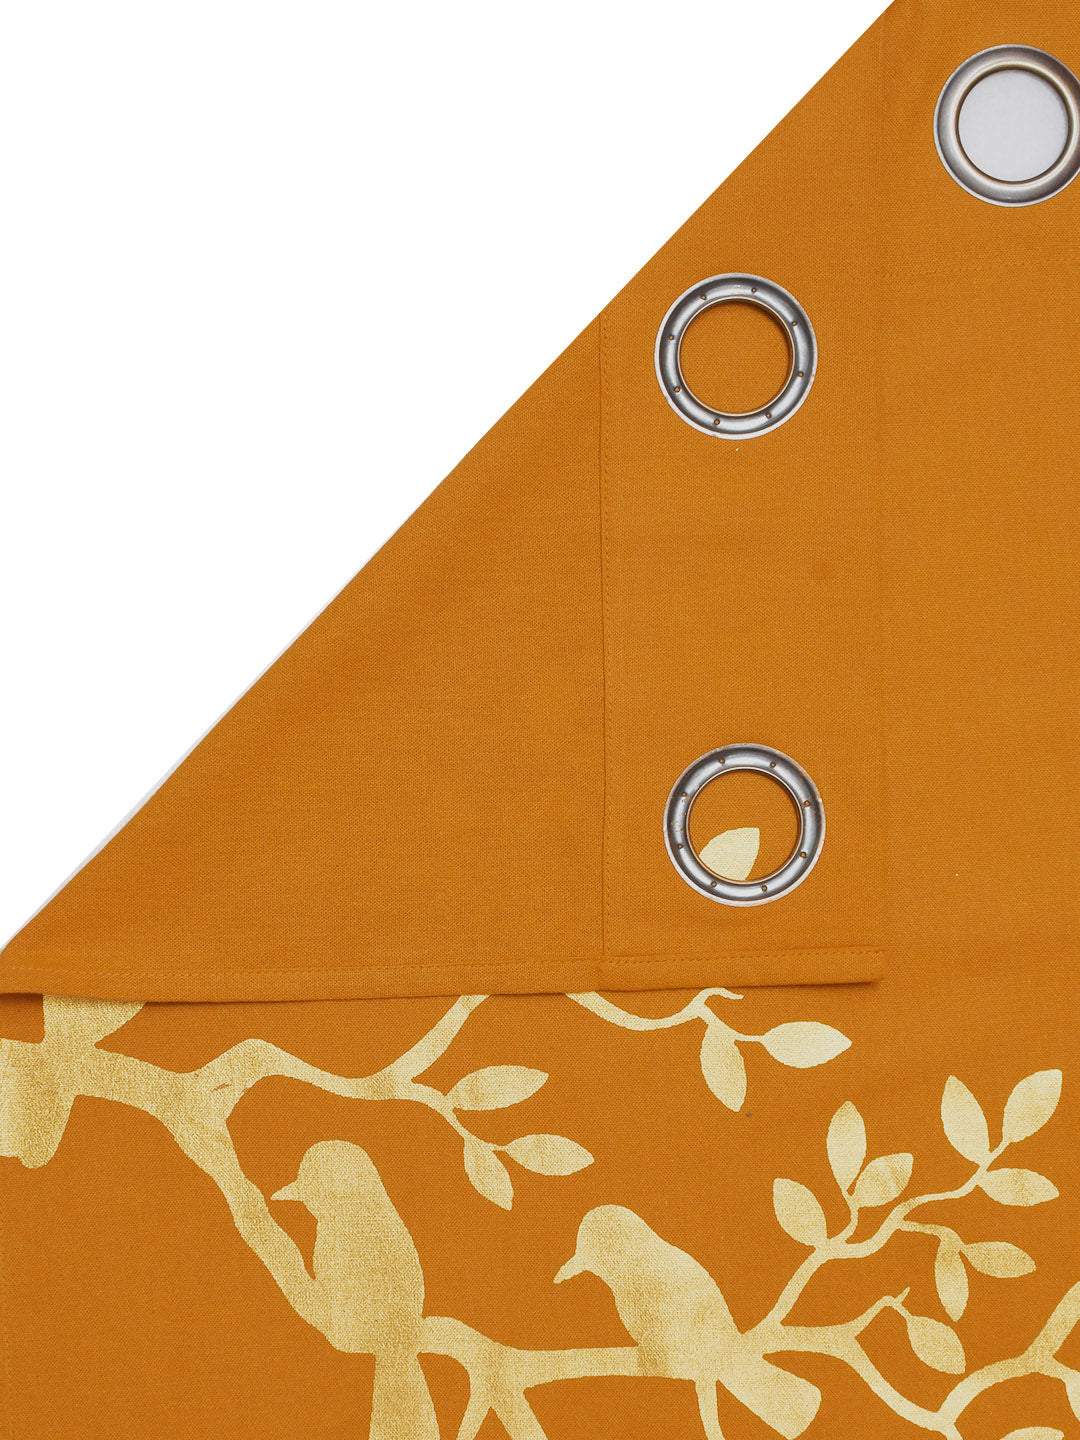 Blanc9 Songbird Yellow 7ft. Set of 2 Foil Printed Curtains